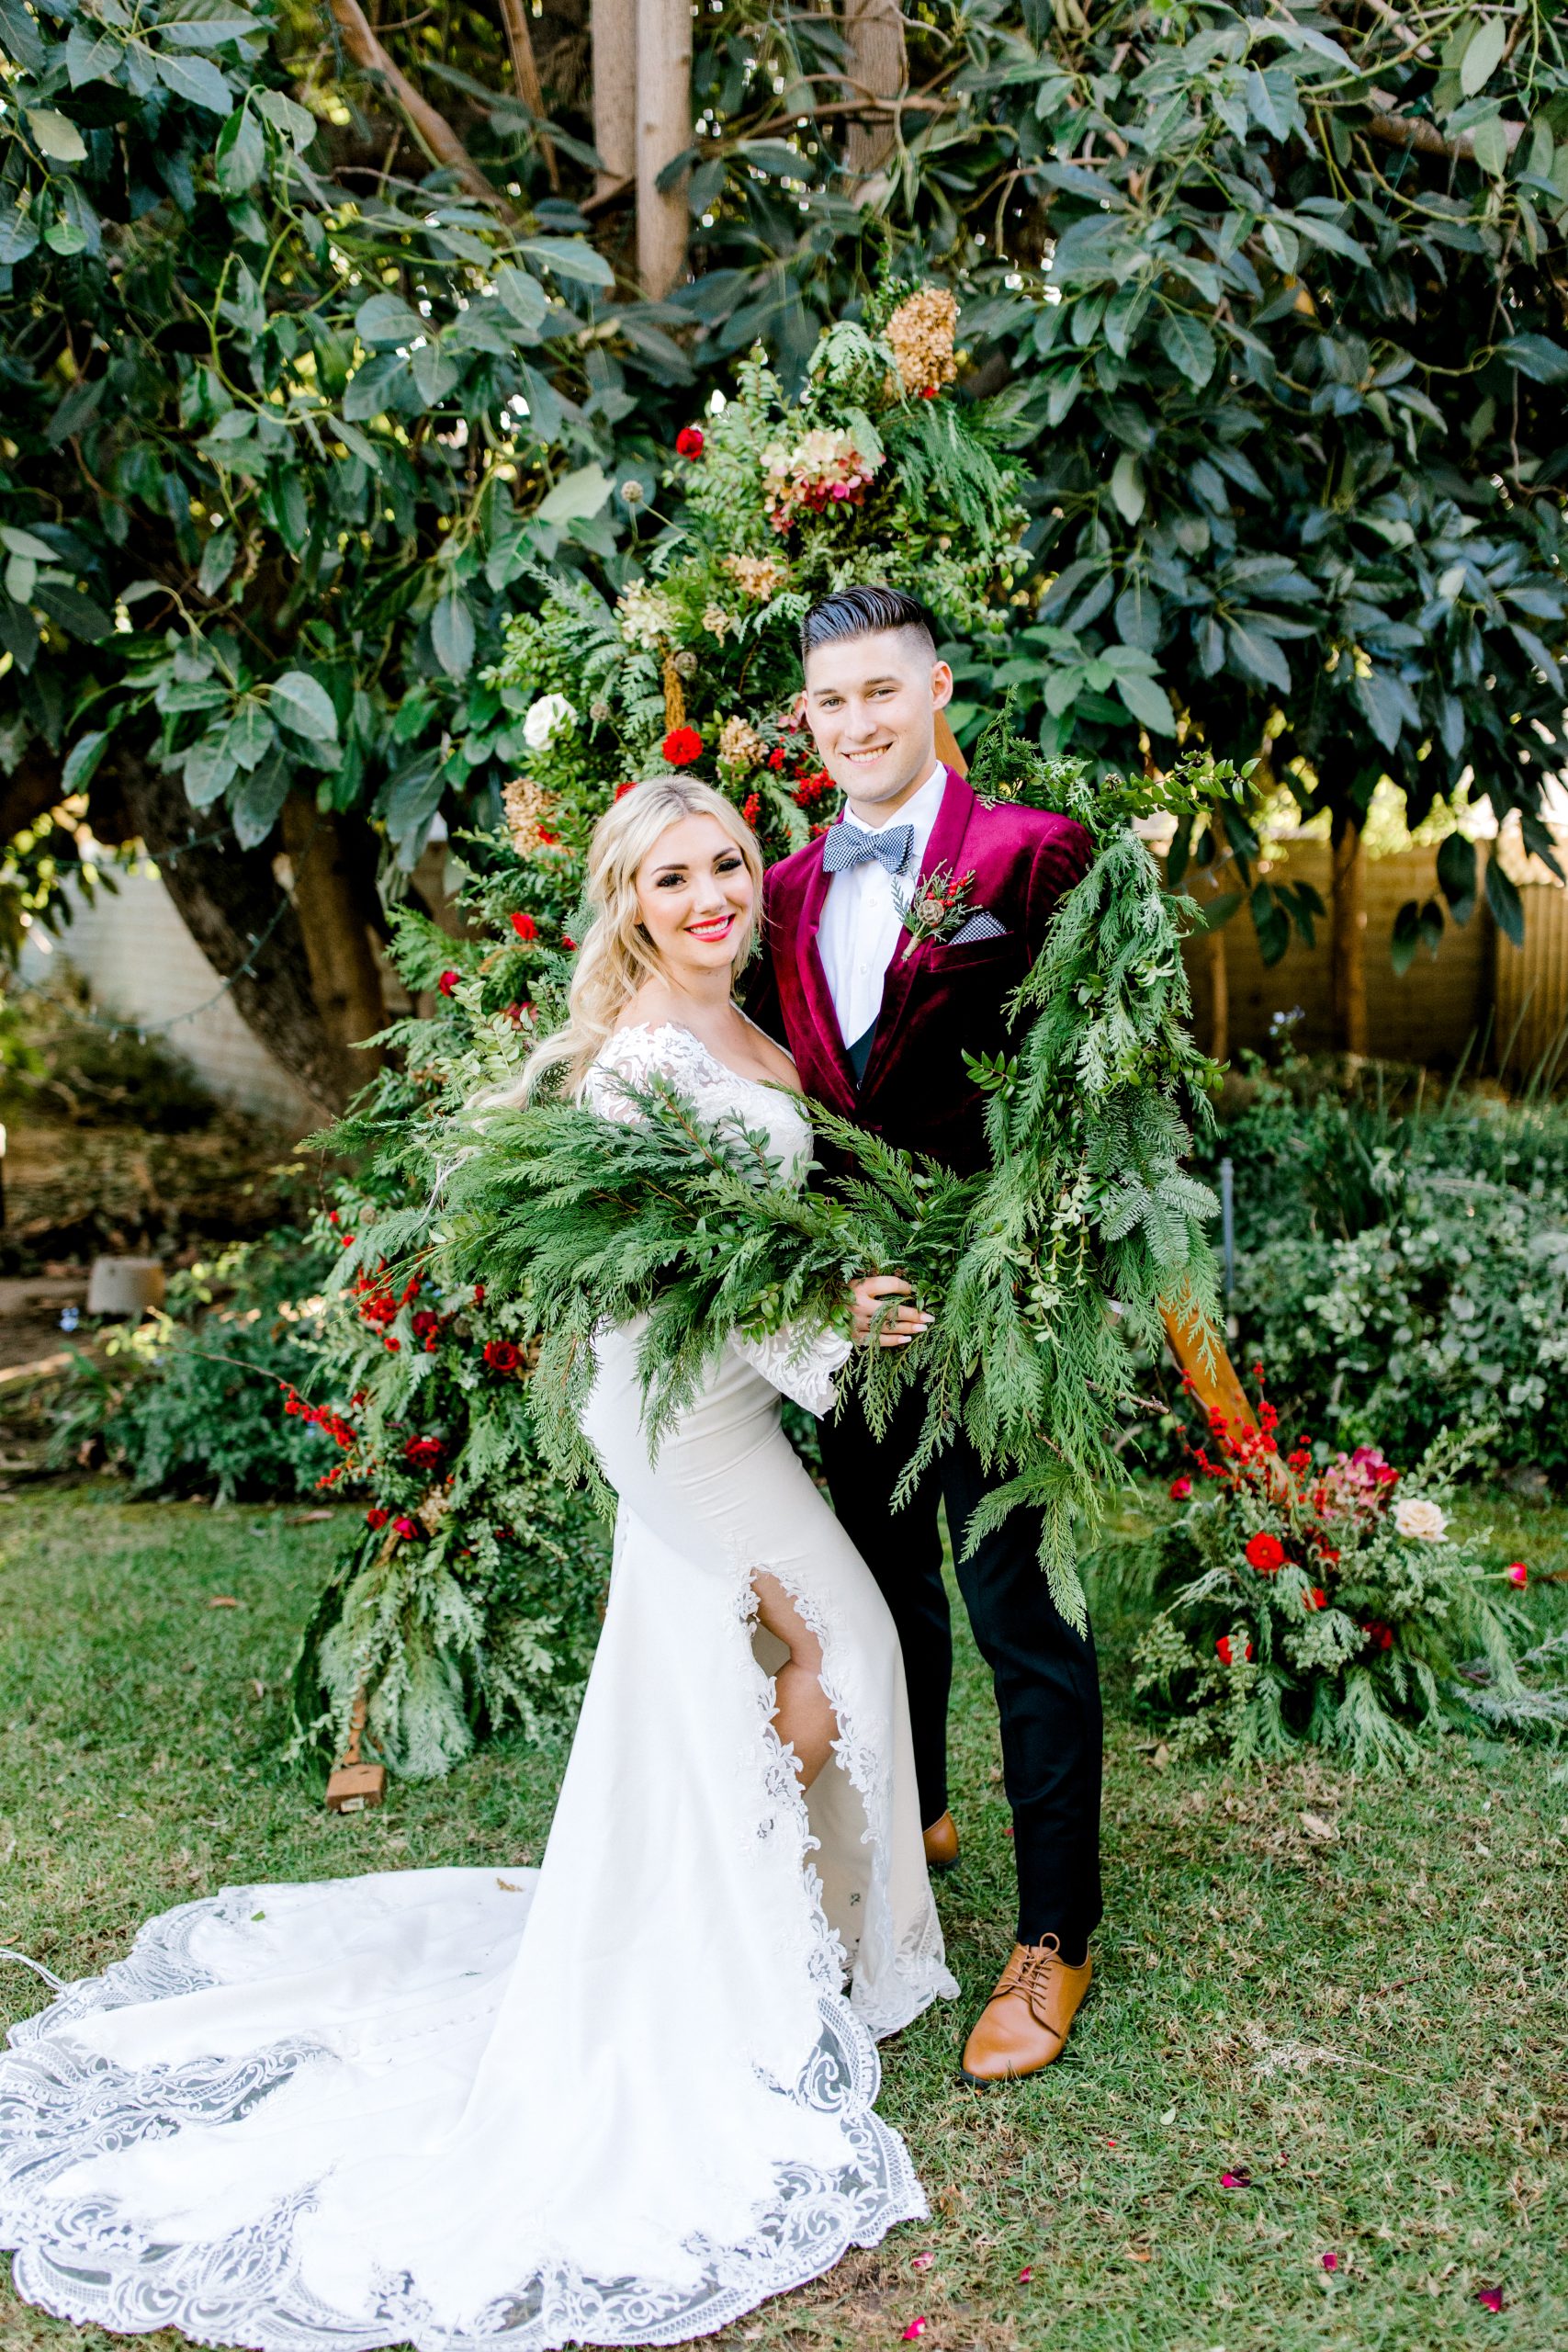 Groom in Velvet Suit with Real Bride Wearing Luxe Crepe Bell Sleeve Wedding Dress Called Armante by Sottero and Midgley